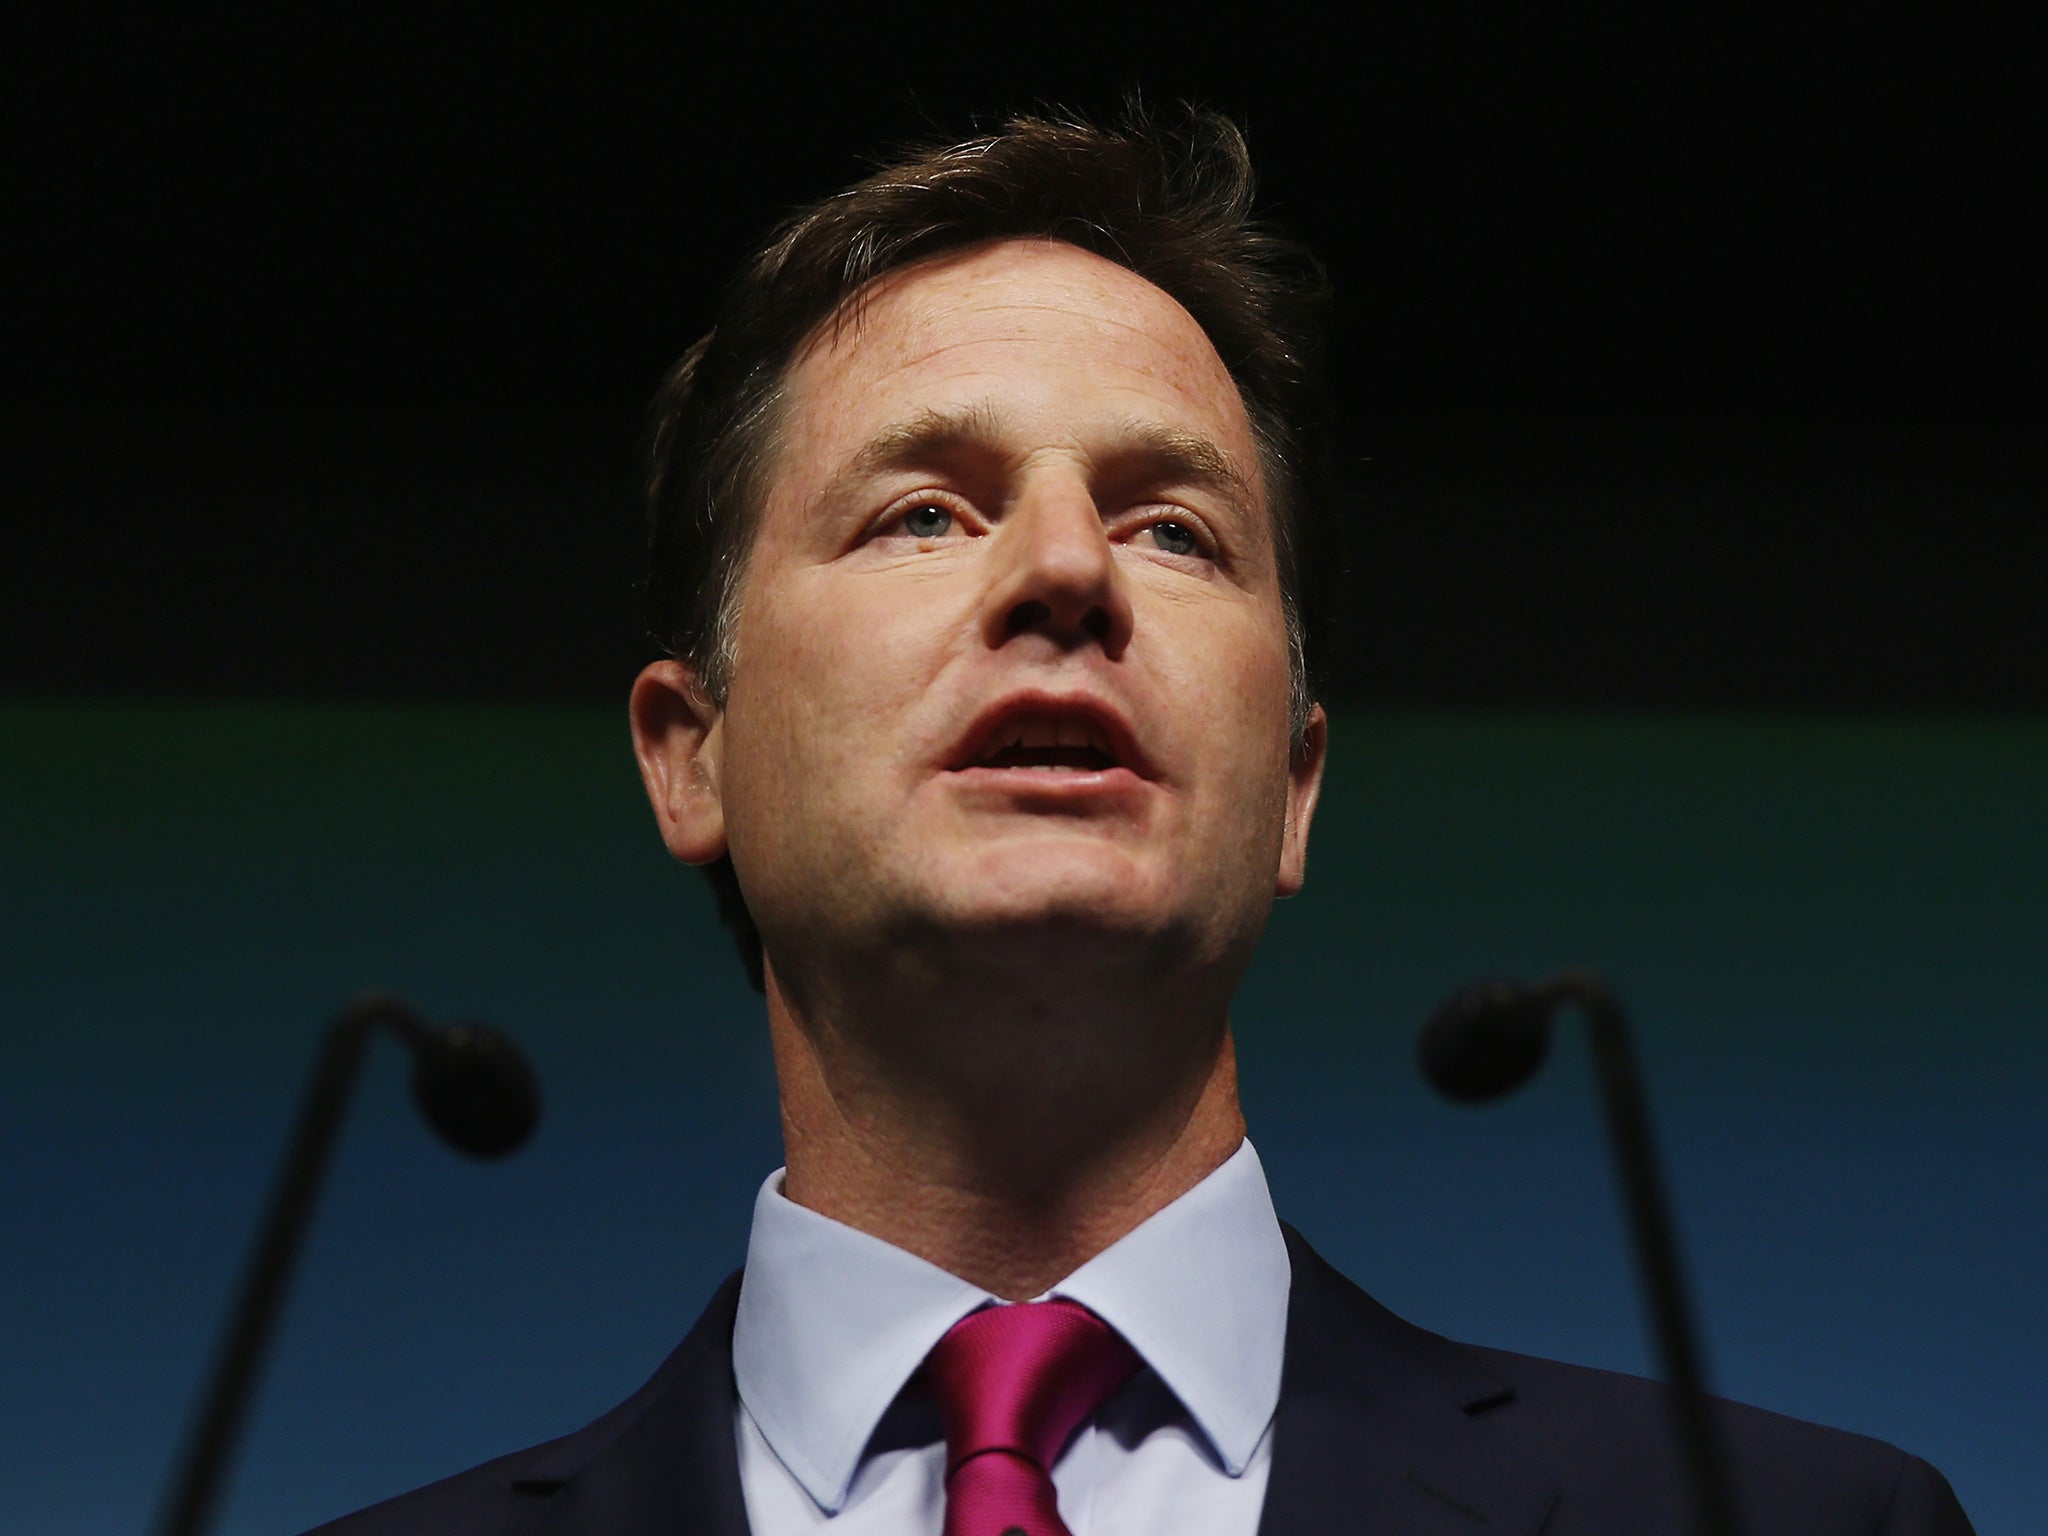 Nick Clegg said the scheme was designed for young people, for whom 'the dream of homeownership is increasingly out of reach'